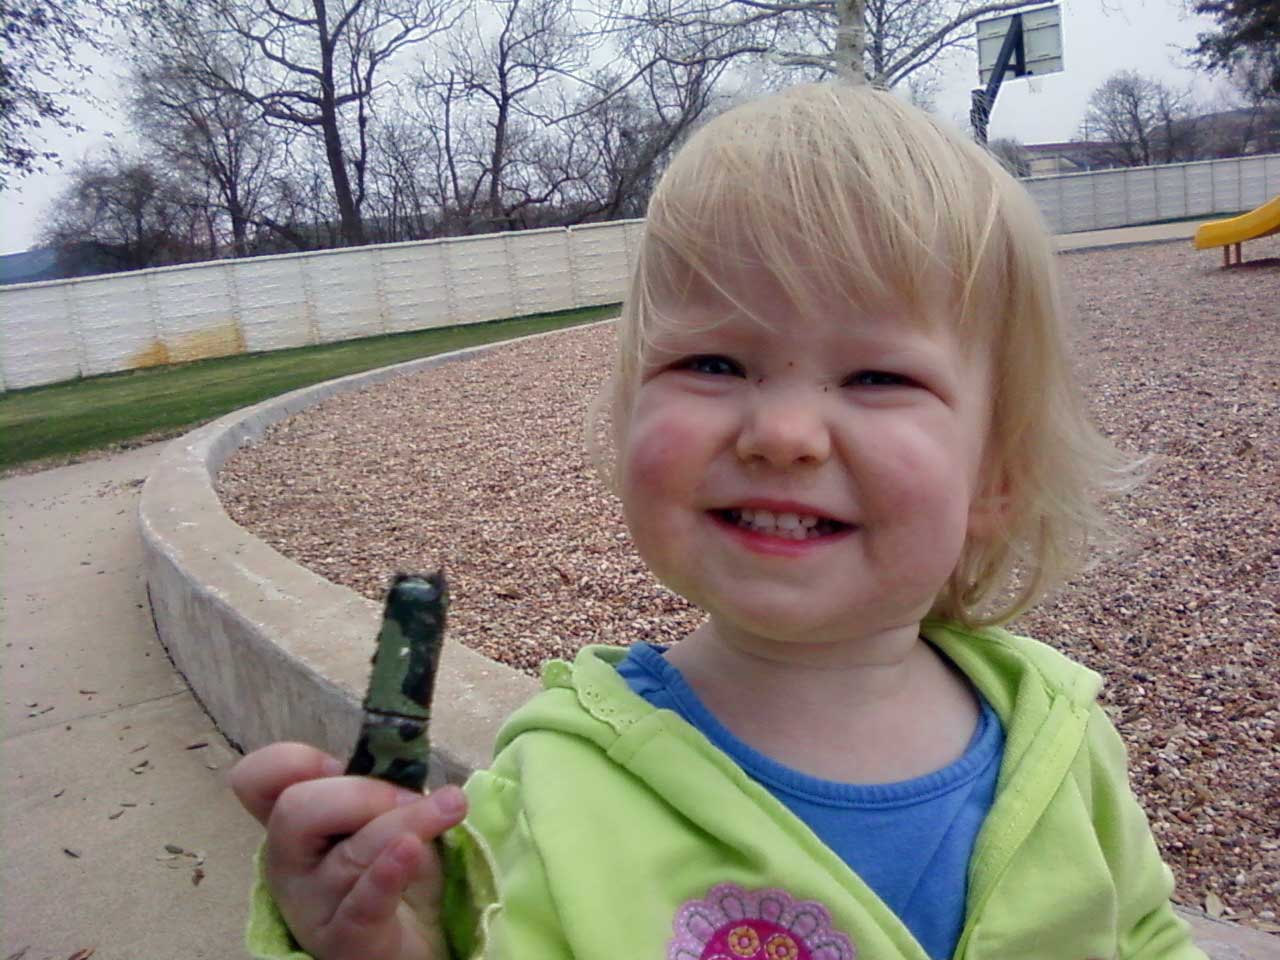 Emily and the geocache